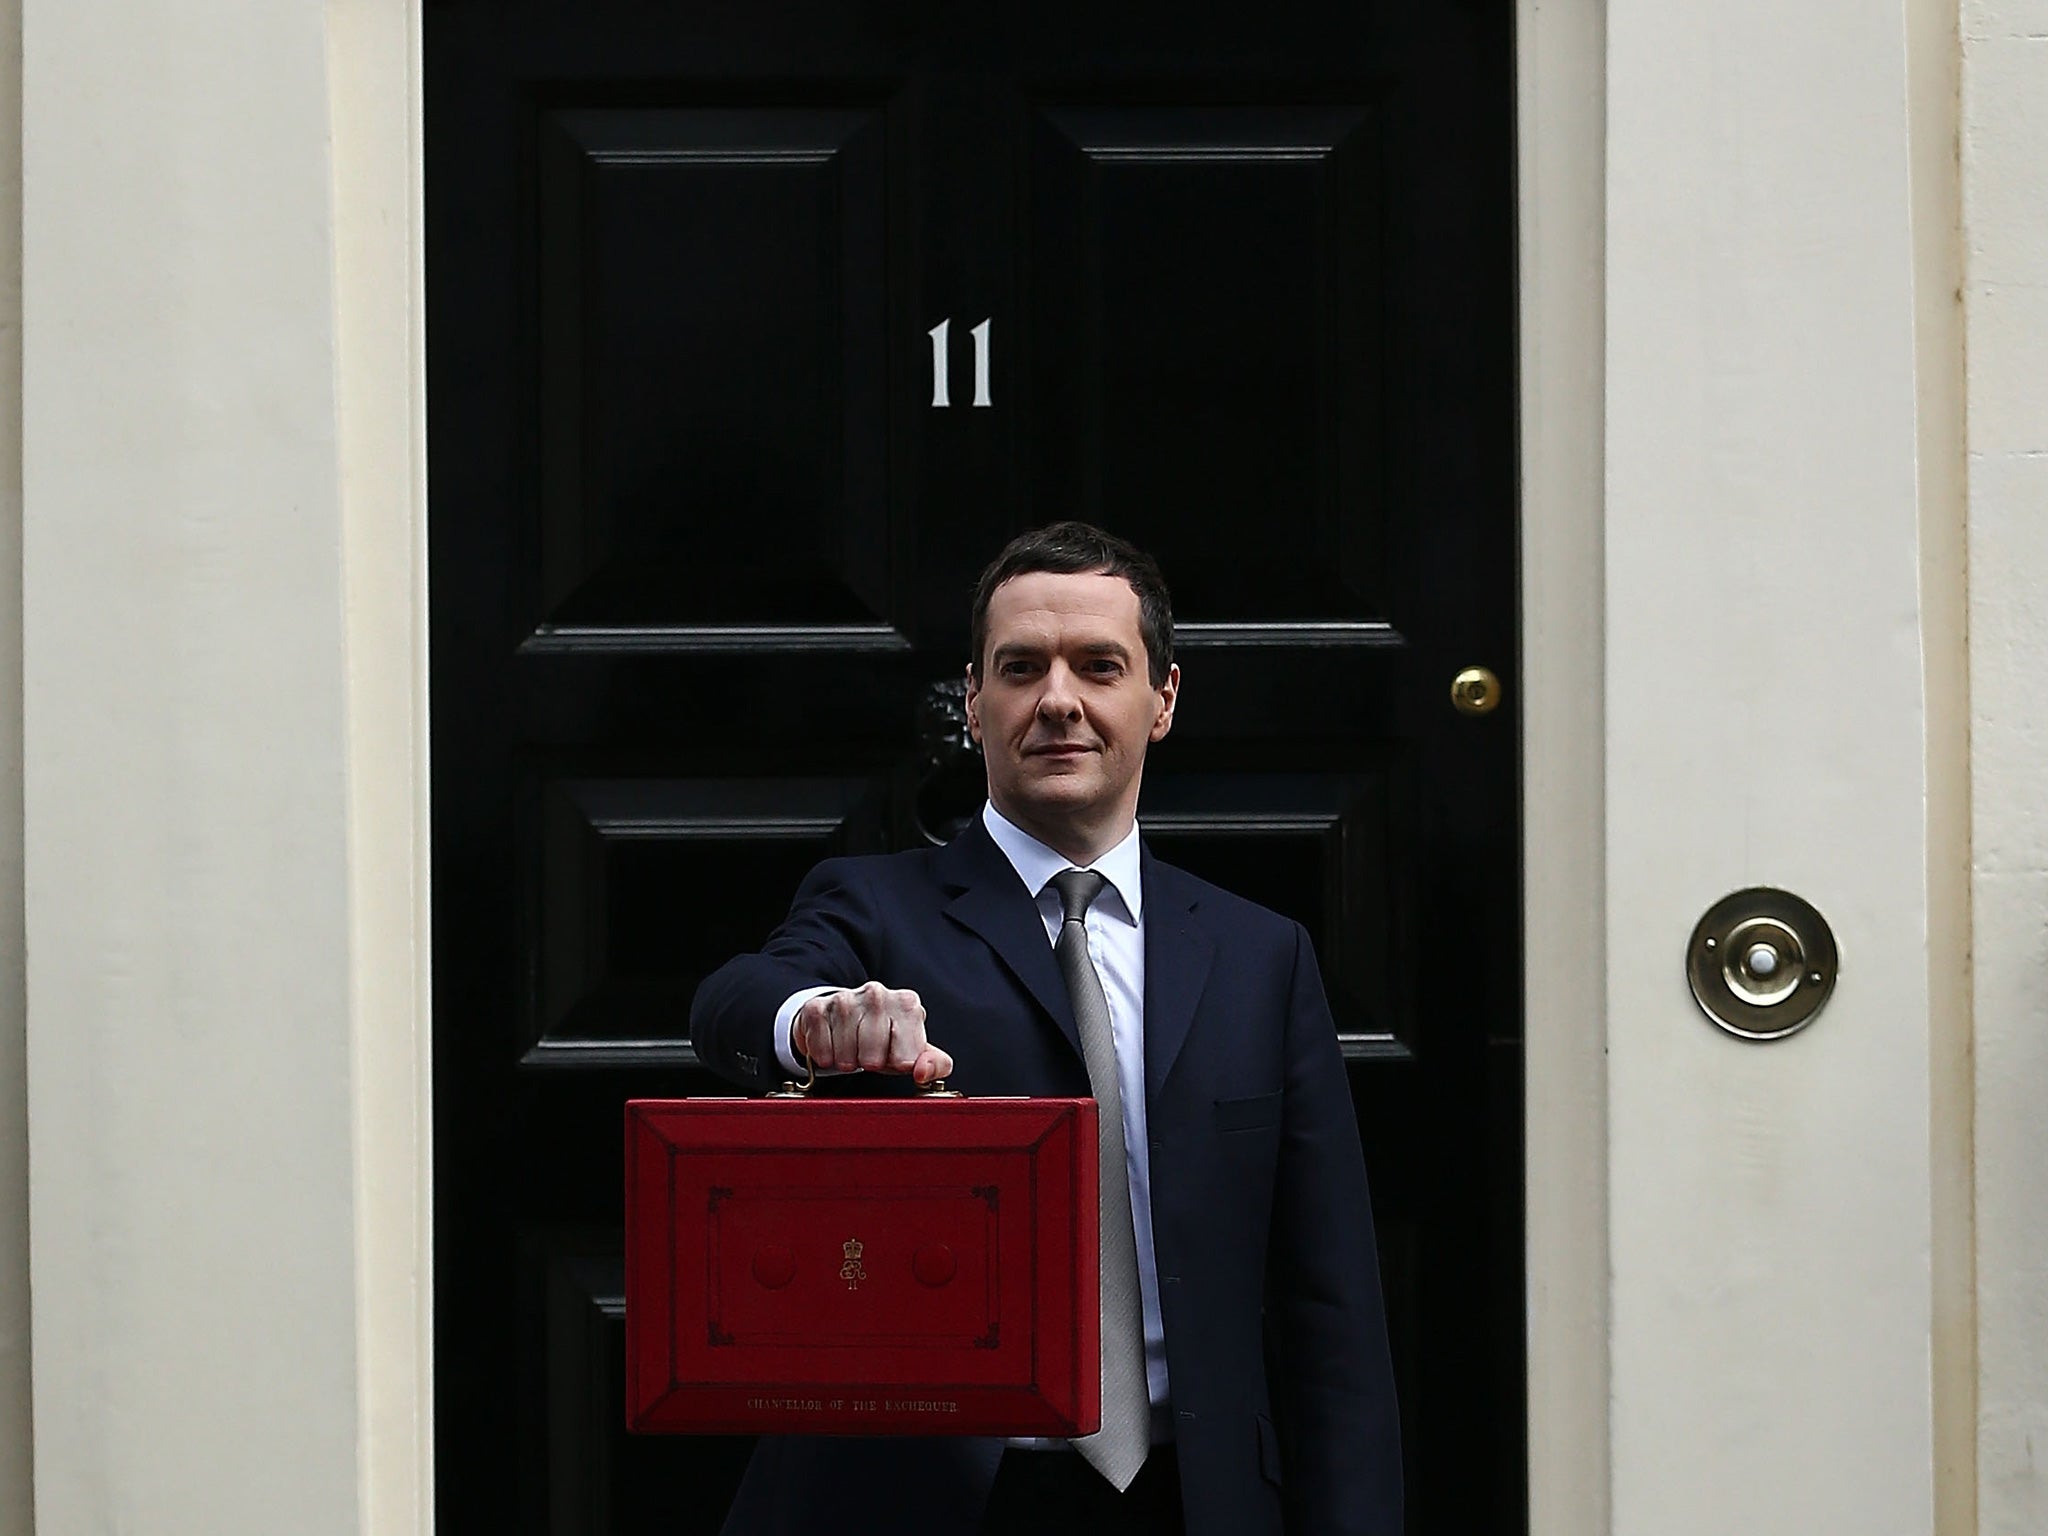 George Osborne made his final pitch to voters